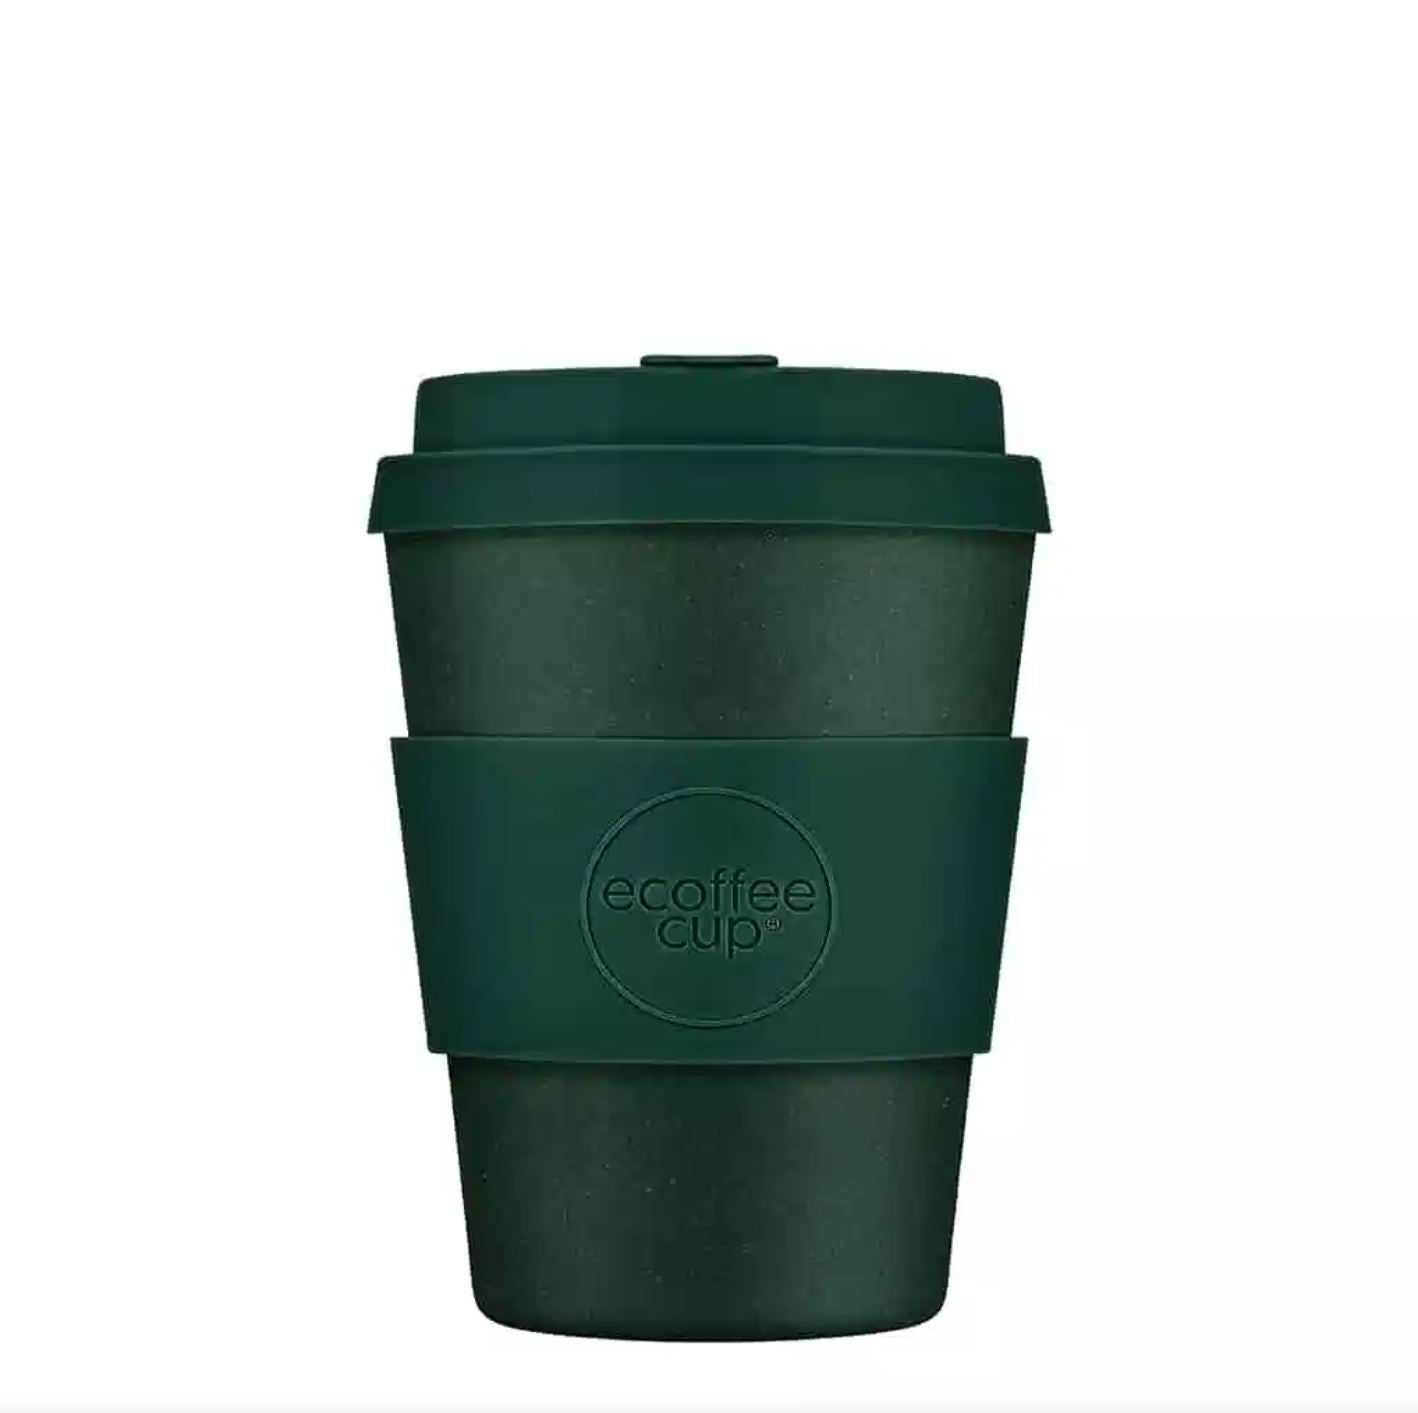 Ecoffee Cup Bamboo Fibre Takeaway Cup Leave It Out Arthur 12oz 350 ml Singapore